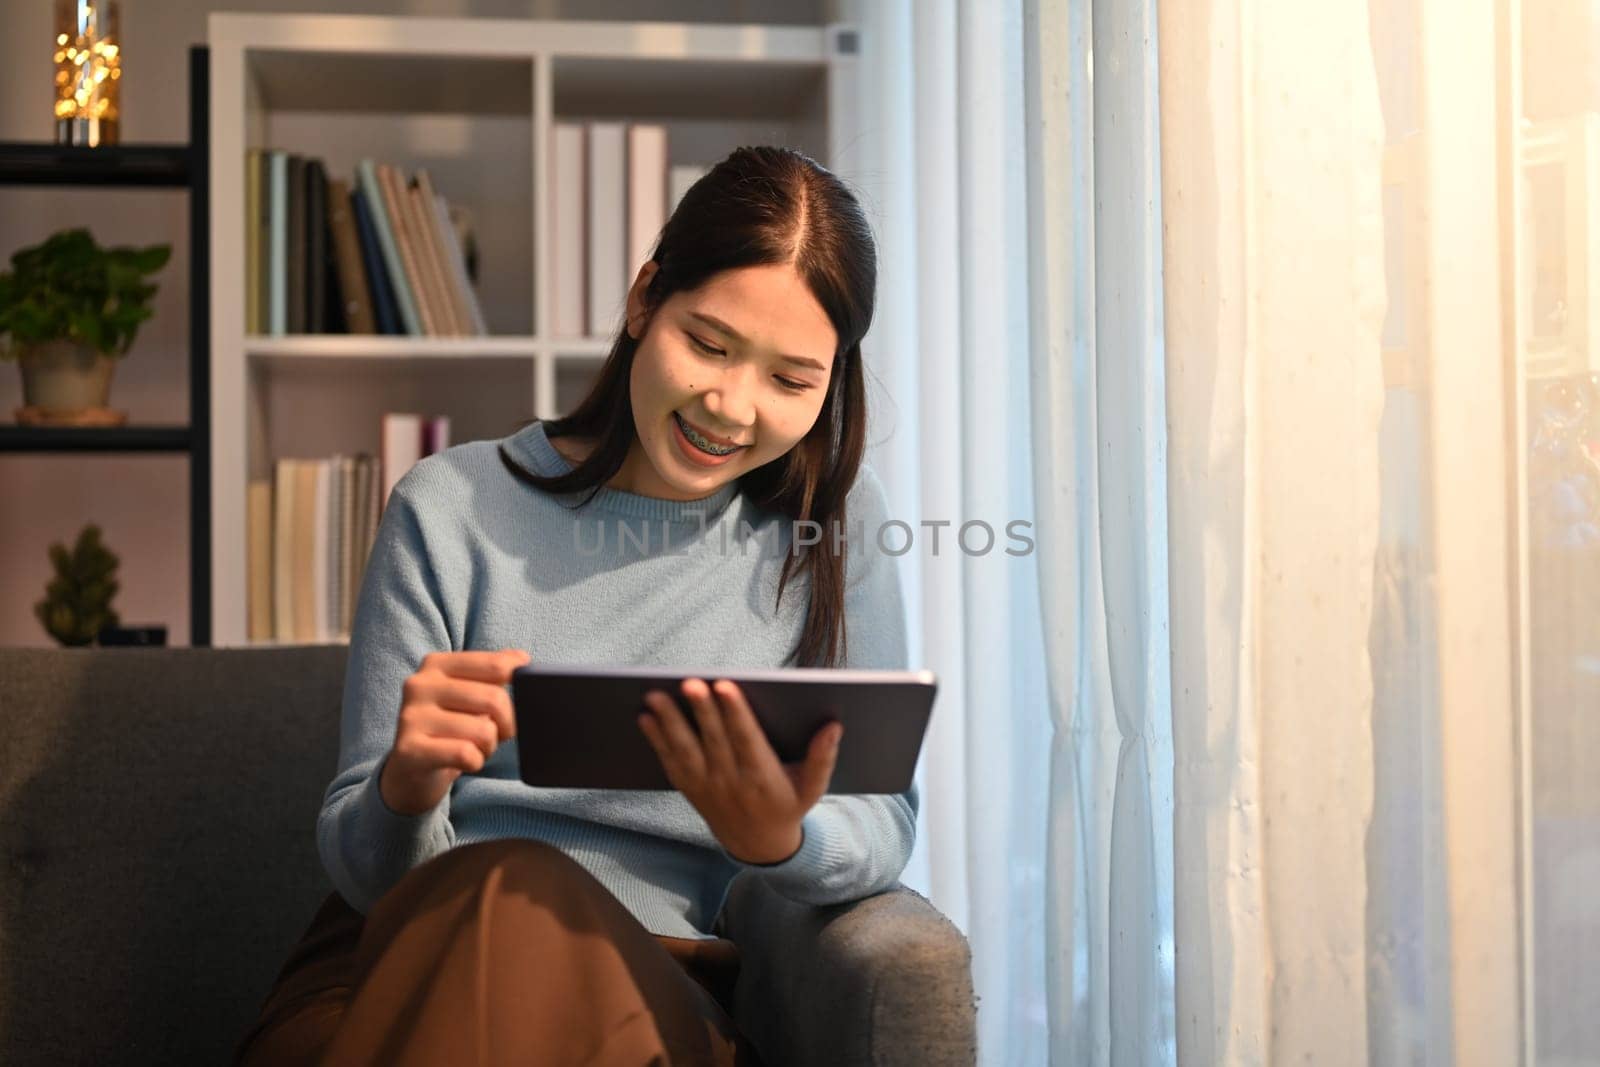 Pleasant millennial woman reading email or checking daily routine on digital tablet, sitting in living room.